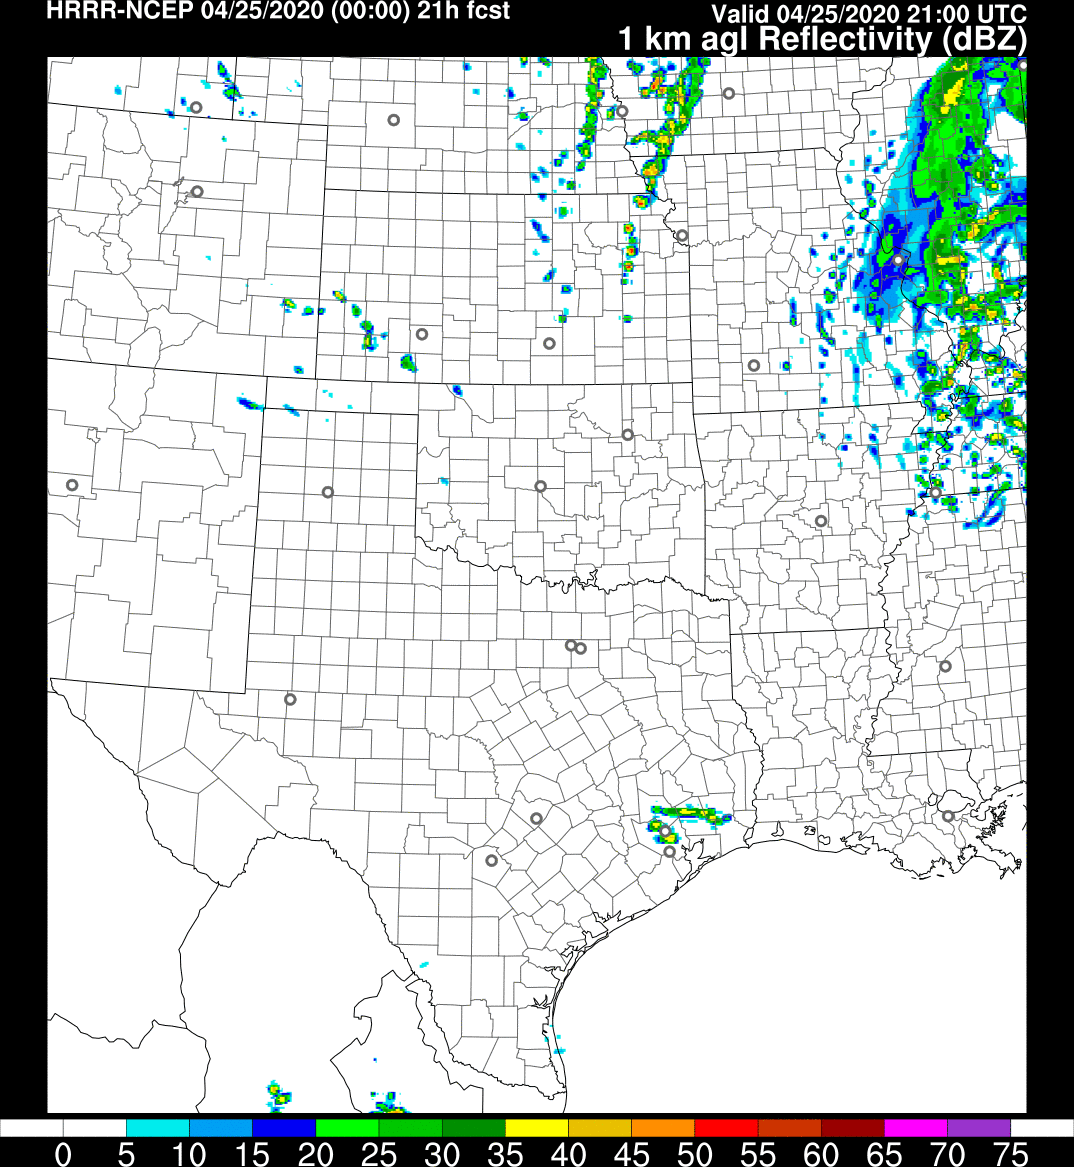 The 00z runs didn't do much better. The HRRR remained basically the only one showing rain, with storms firing up at 4 PM. Even the HRRR was still off by 3-4 hours and showed nothing to our west. So while it may have had the signal right, it was way off on details. (8/x).